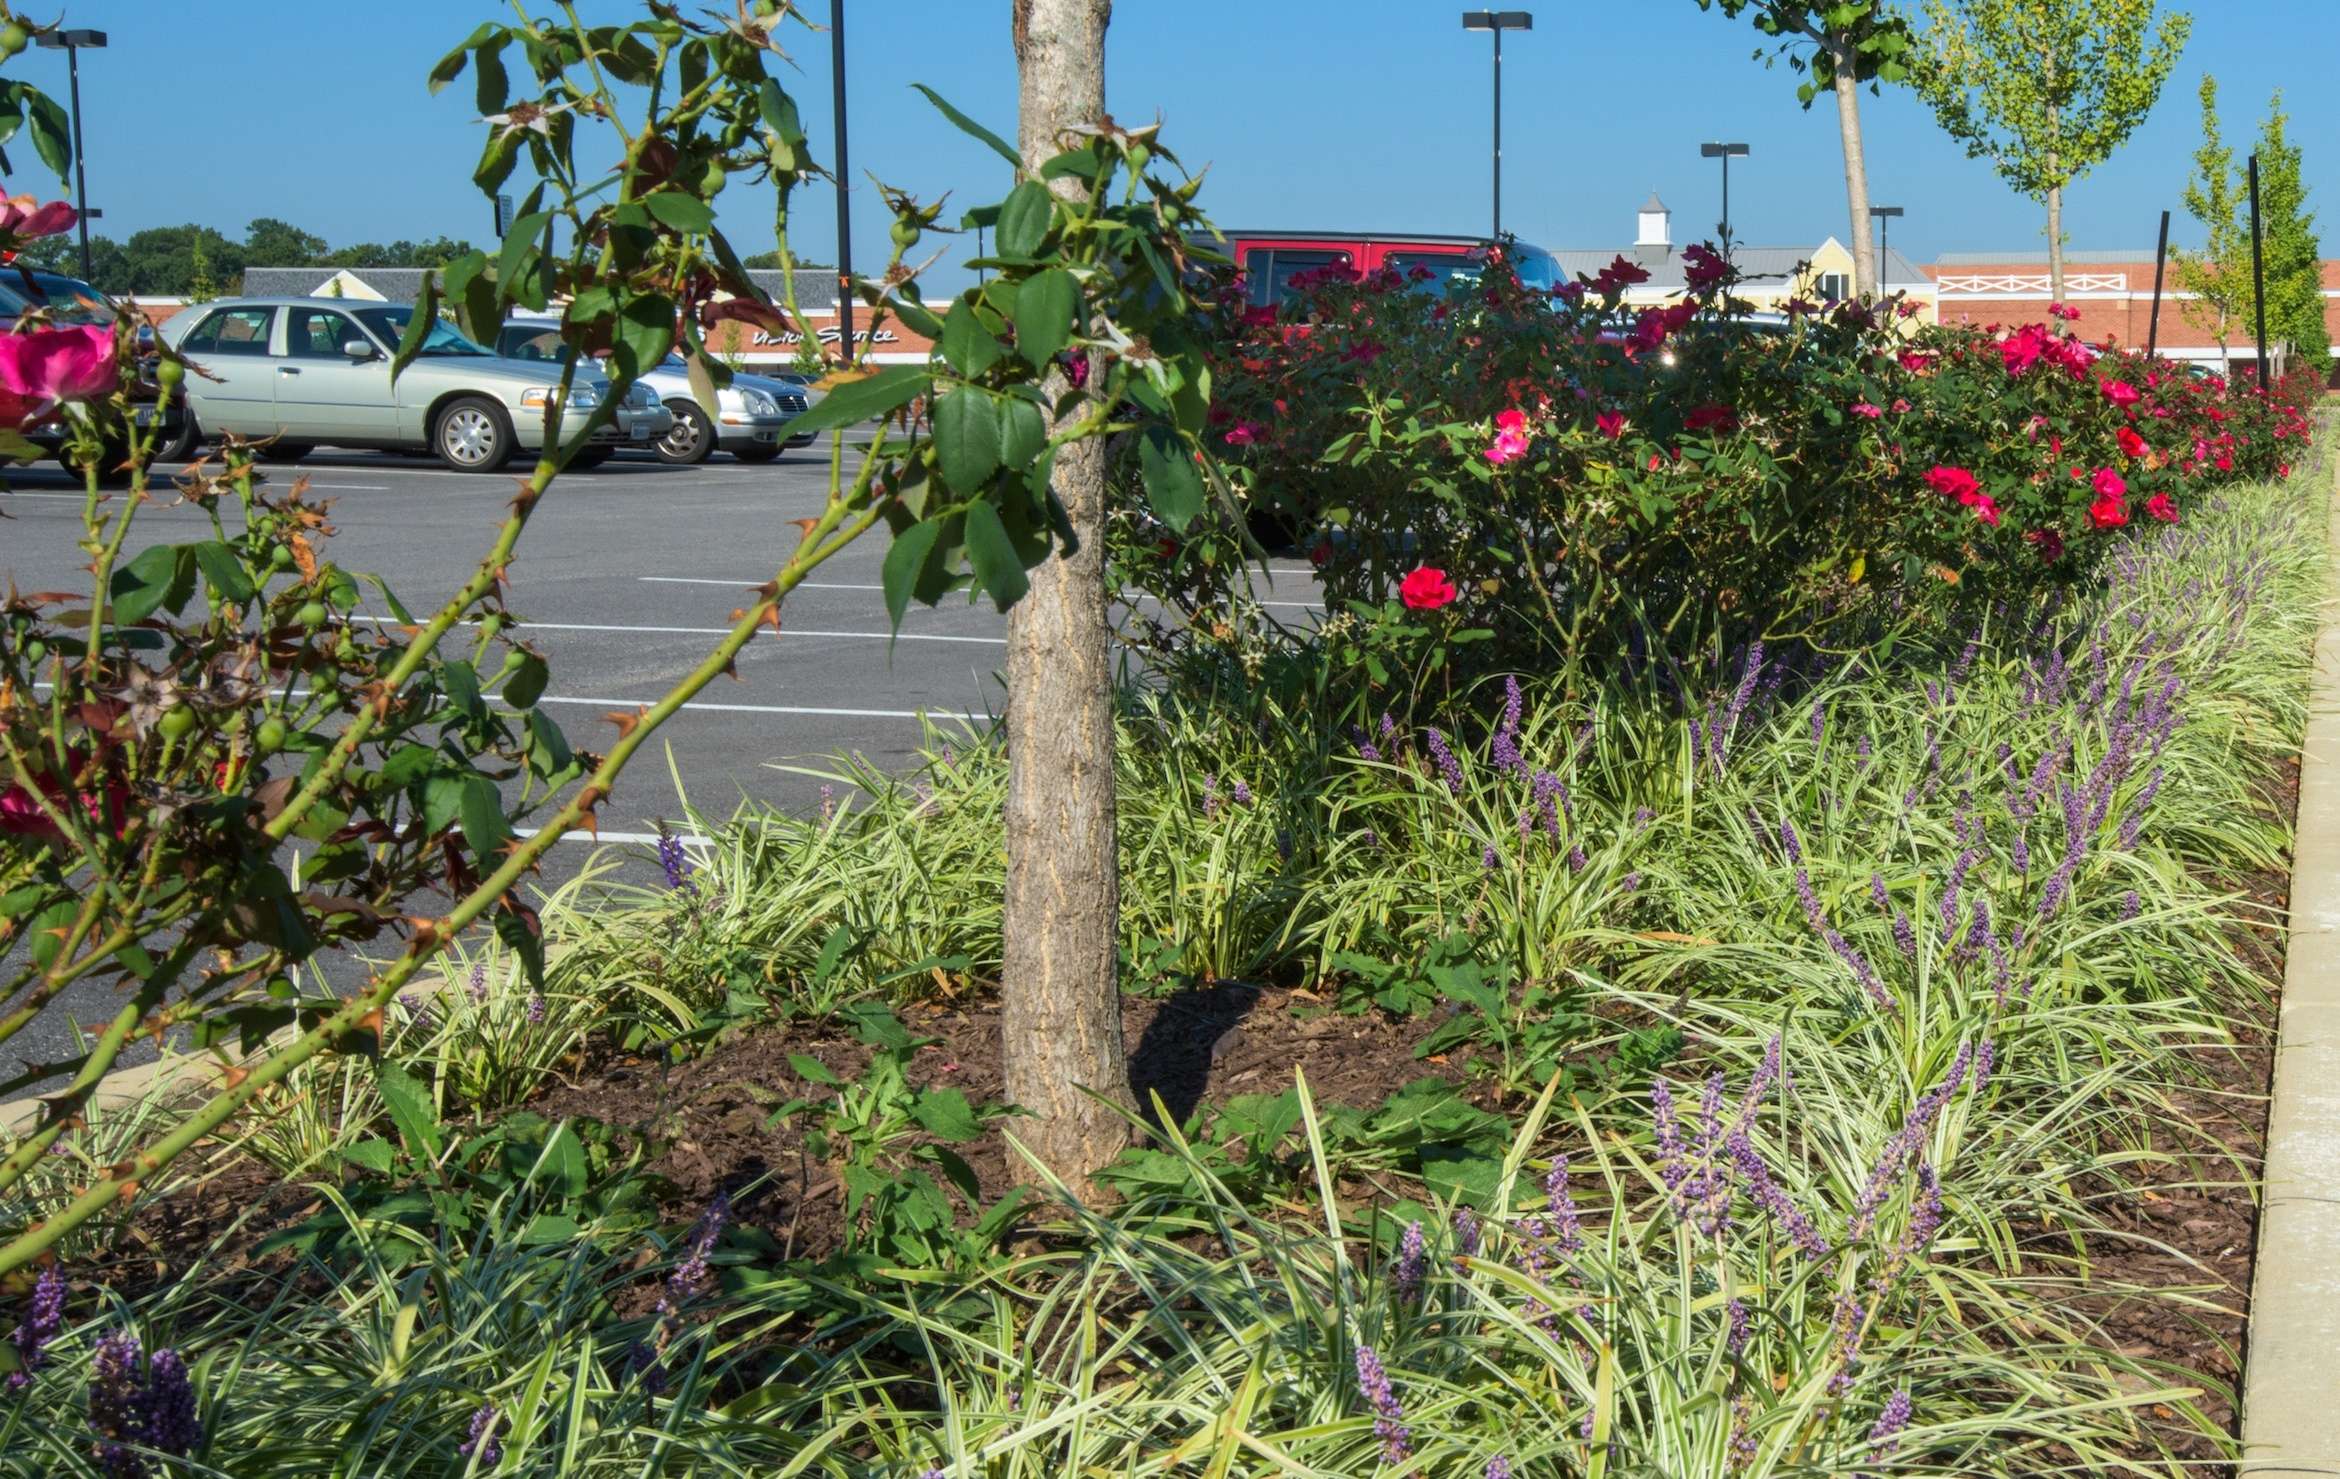 7 Landscaping Tips for Parking Lots, Walkways, & Roadsides in Washington DC